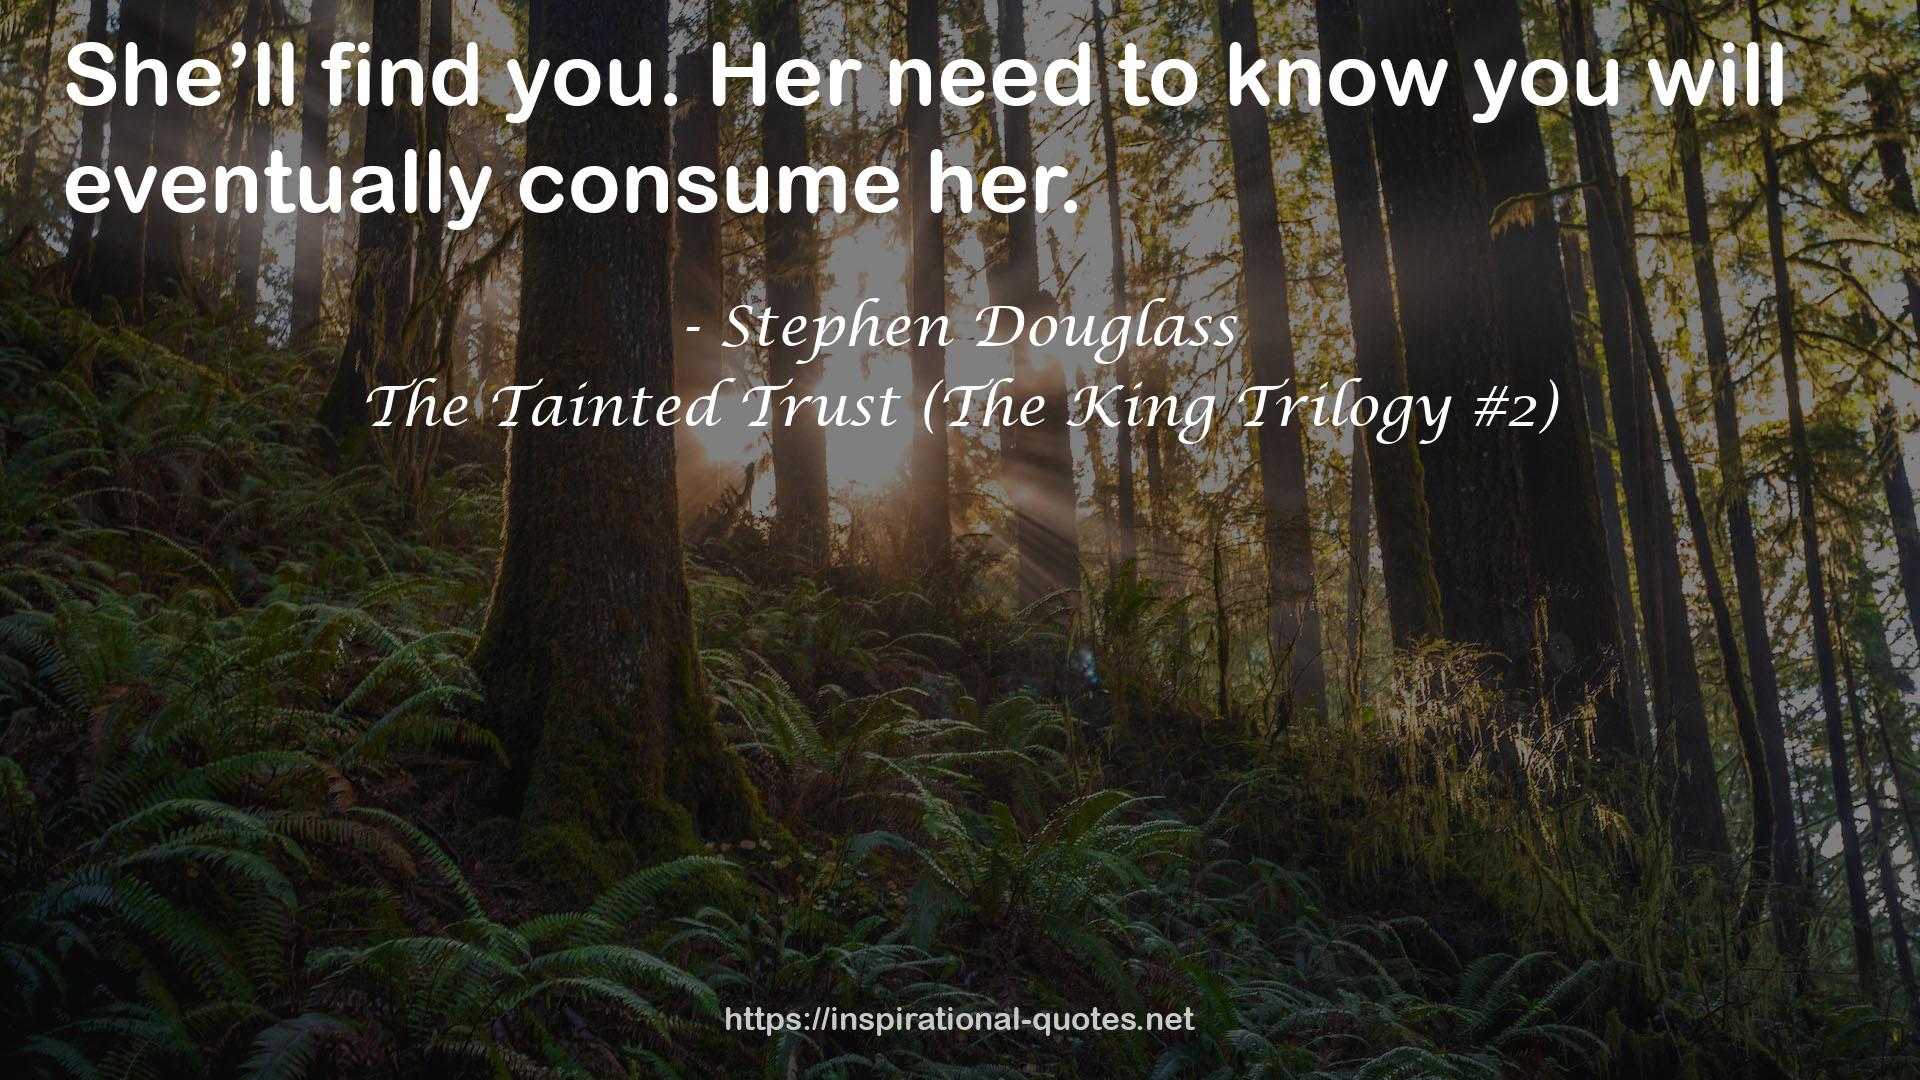 The Tainted Trust (The King Trilogy #2) QUOTES